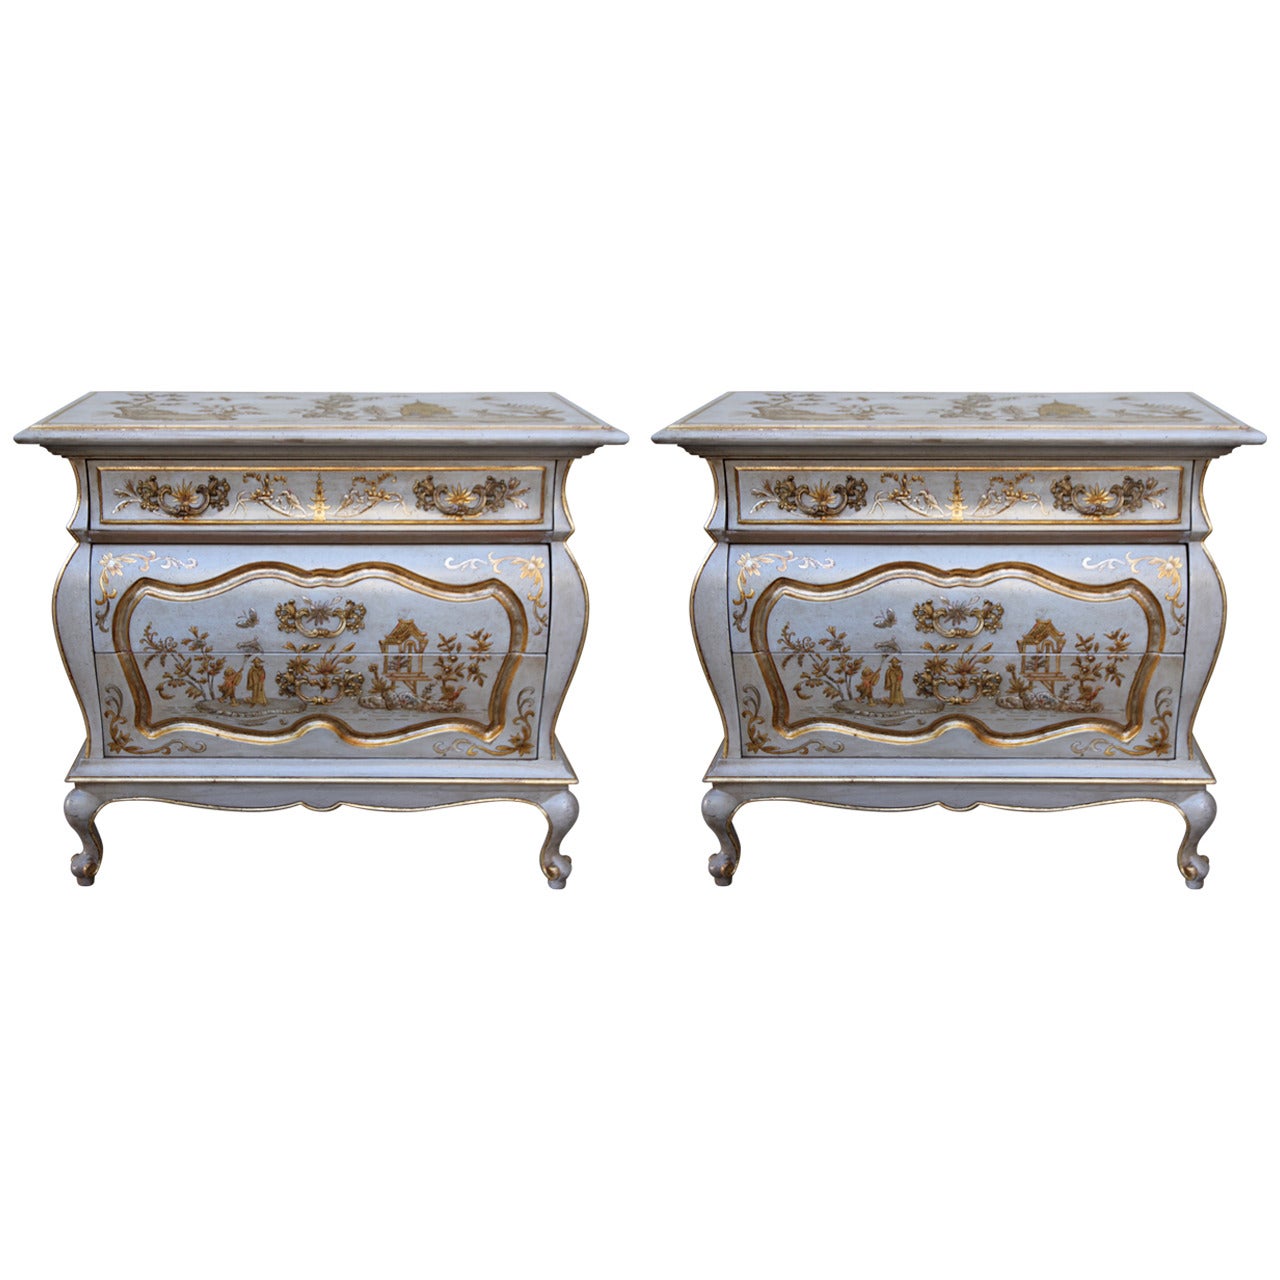 Pair of French Chinoiserie Painted Chests